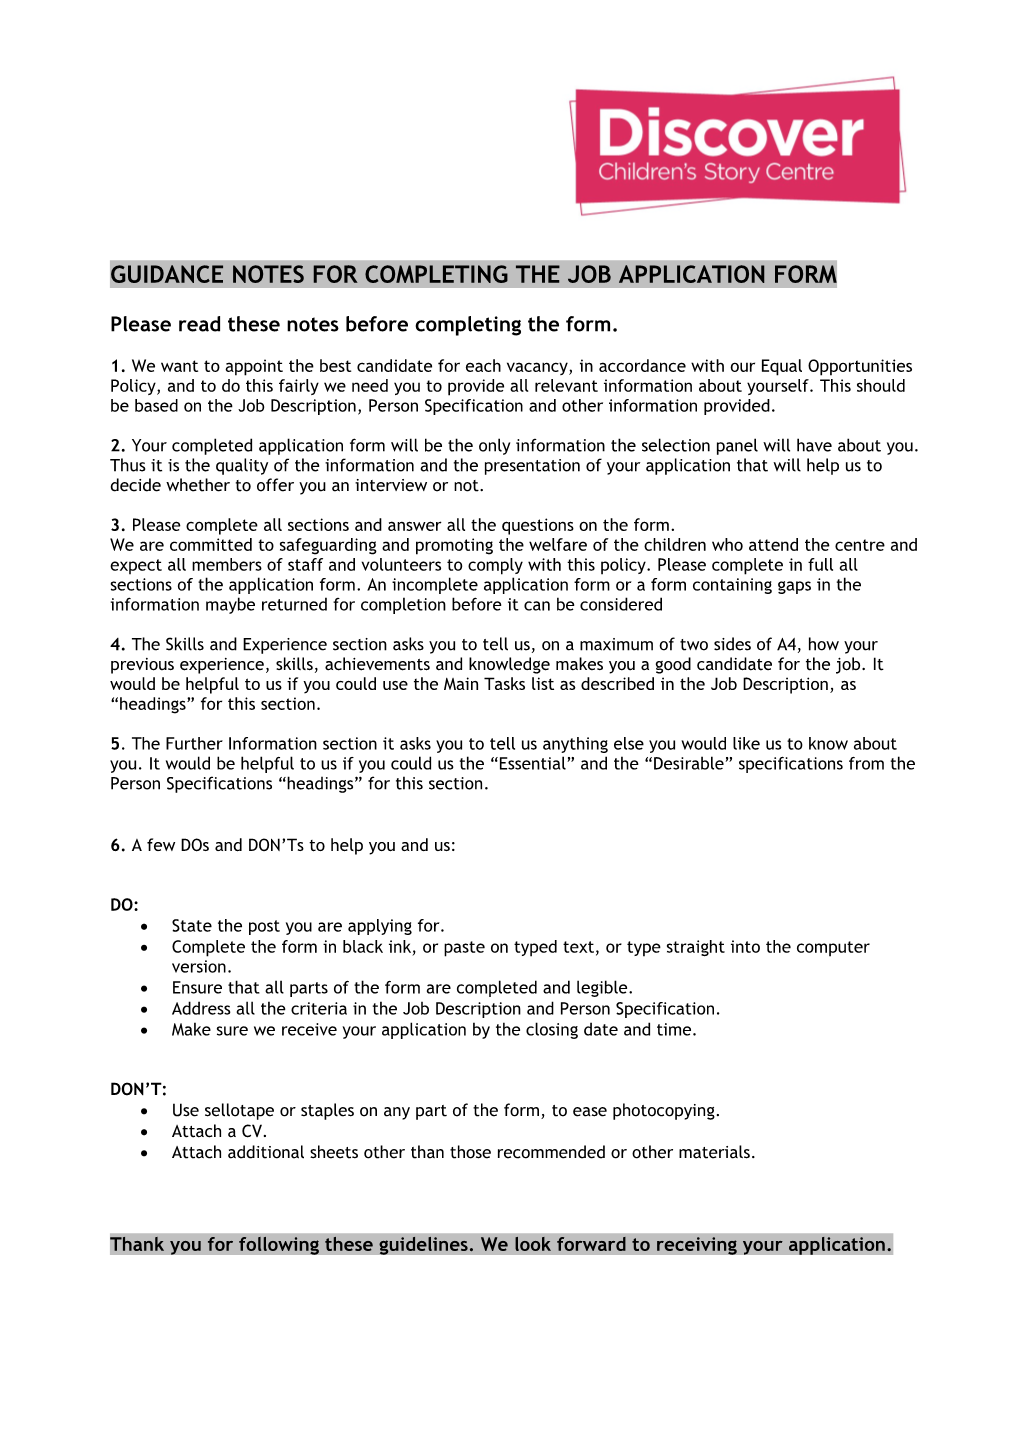 Guidance Notes for Completing the Job Application Form